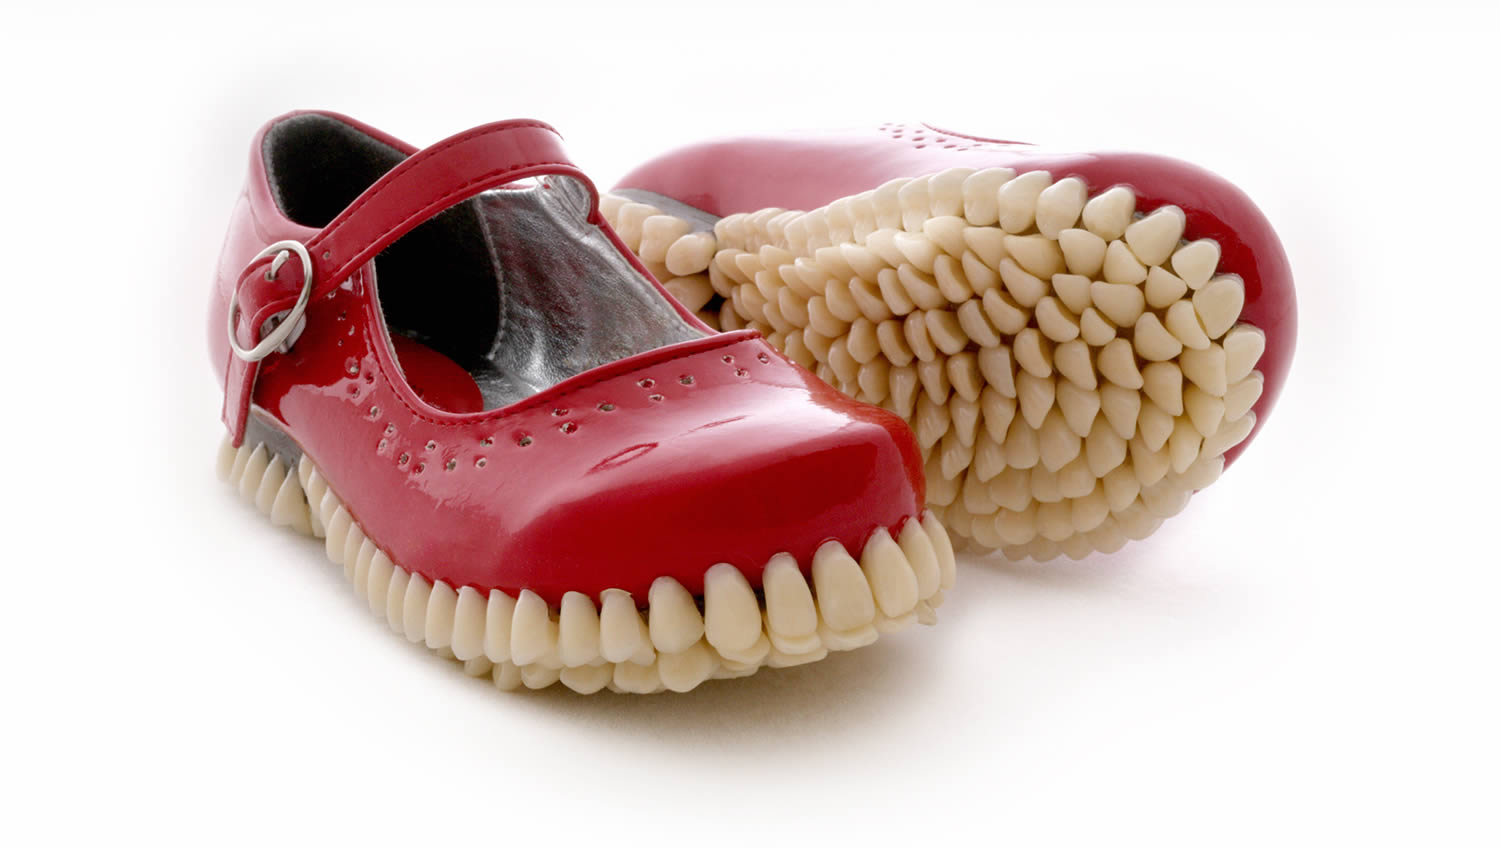 red shoes with teeth soles, FANTICH & YOUNG